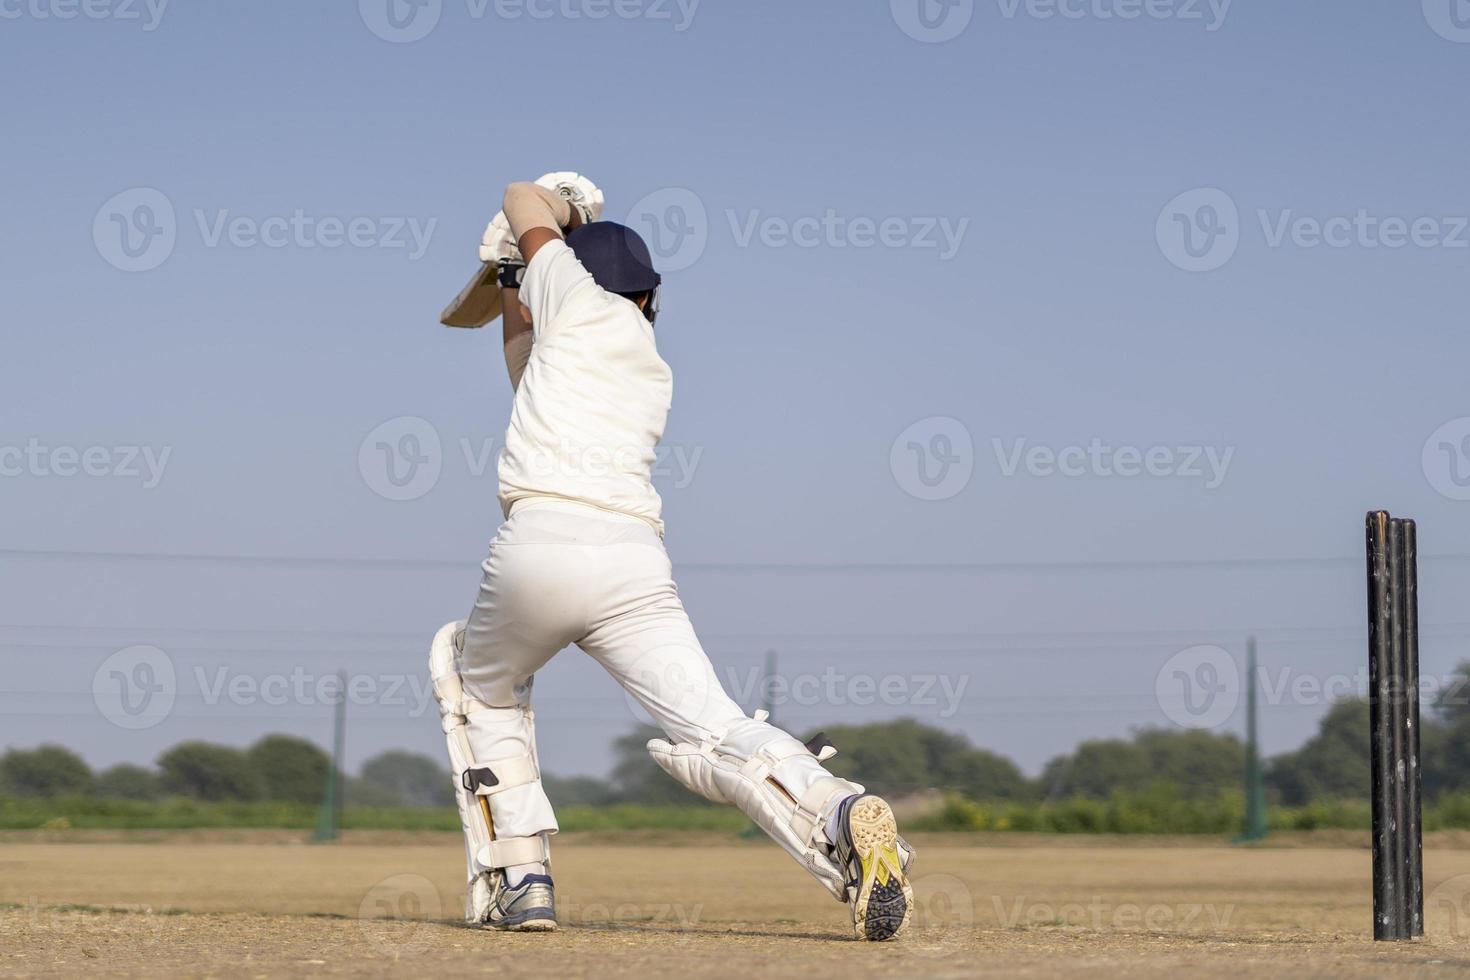 A cricketer playing cricket on the pitch in white dress for test matches. Sportsperson hitting a shot on the cricket ball. photo